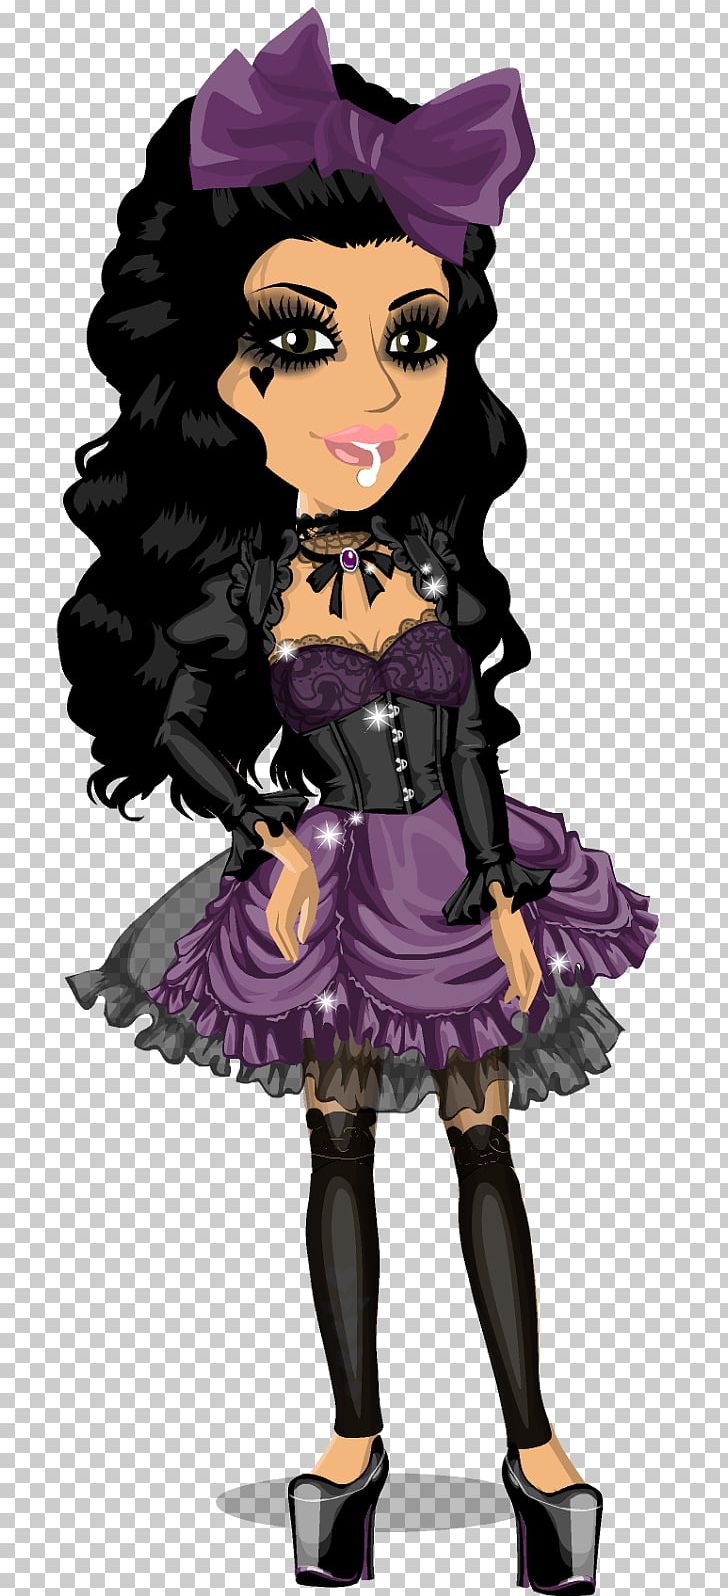 Black Hair Cartoon Character Doll PNG, Clipart, Art, Black Hair, Brown Hair, Cartoon, Character Free PNG Download